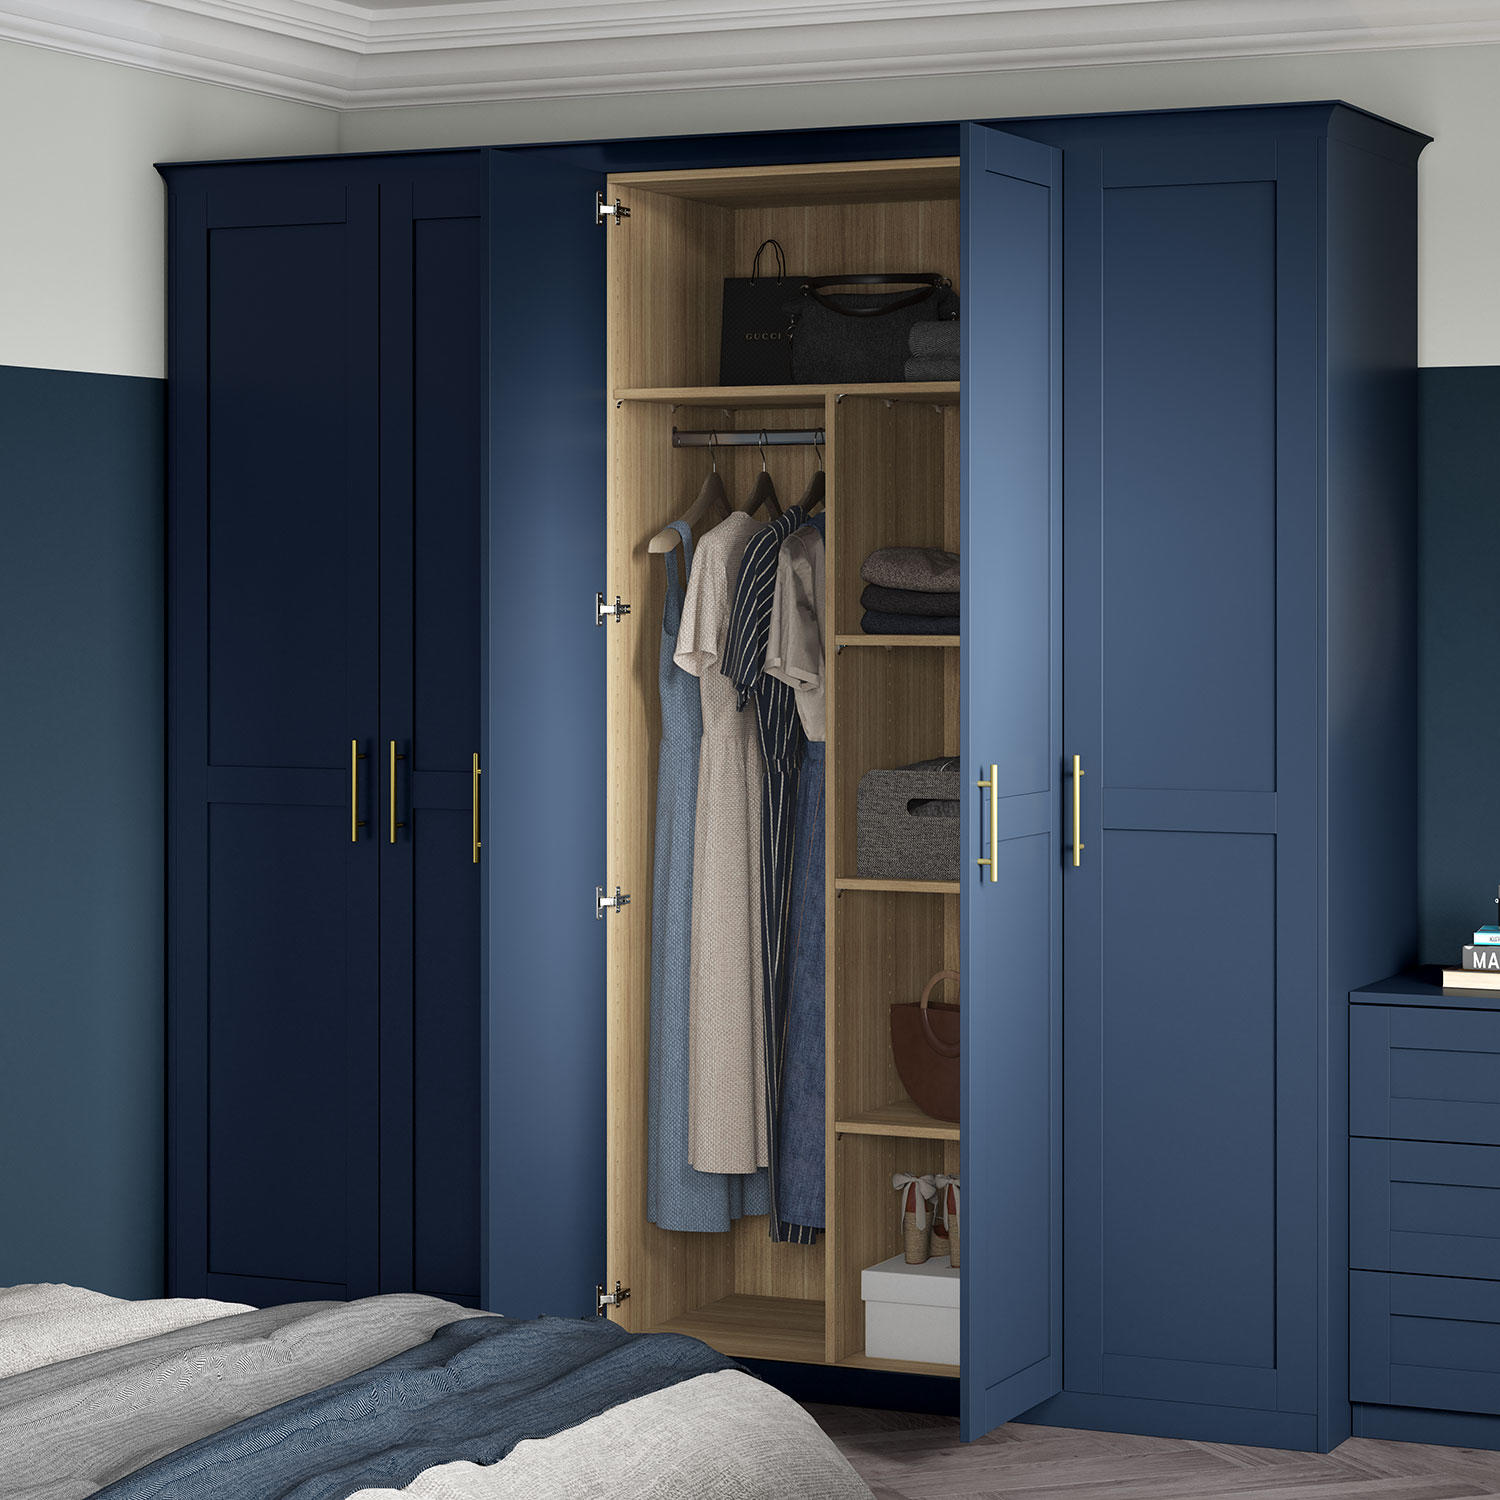 A navy Realm fitted wardrobe with internal storage solutions